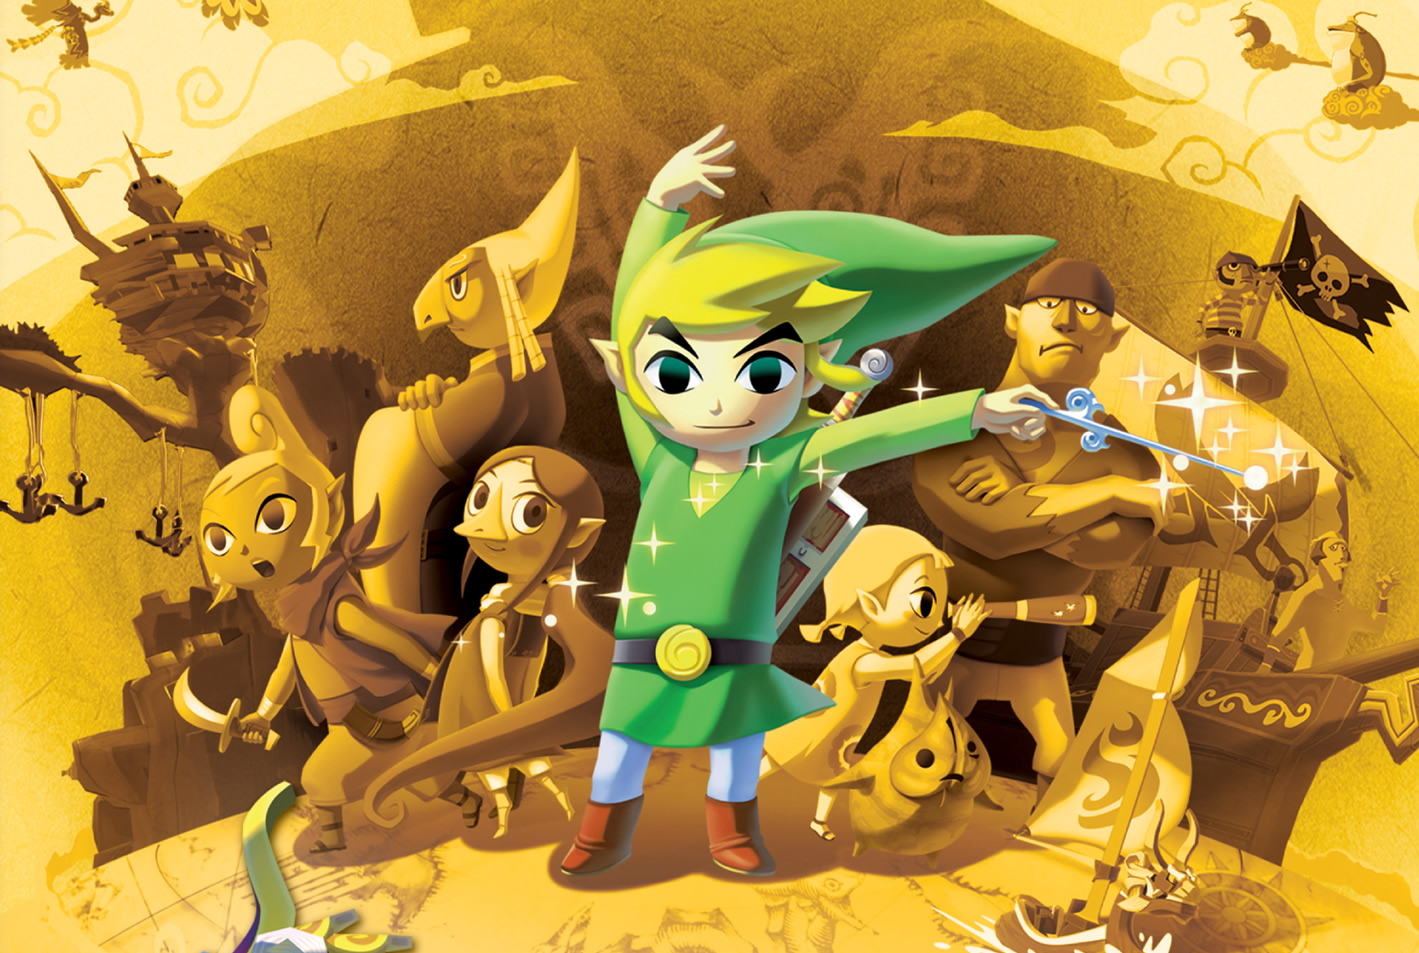 Wind Waker HD Confirmed for October 4th in North America - Pure Nintendo.